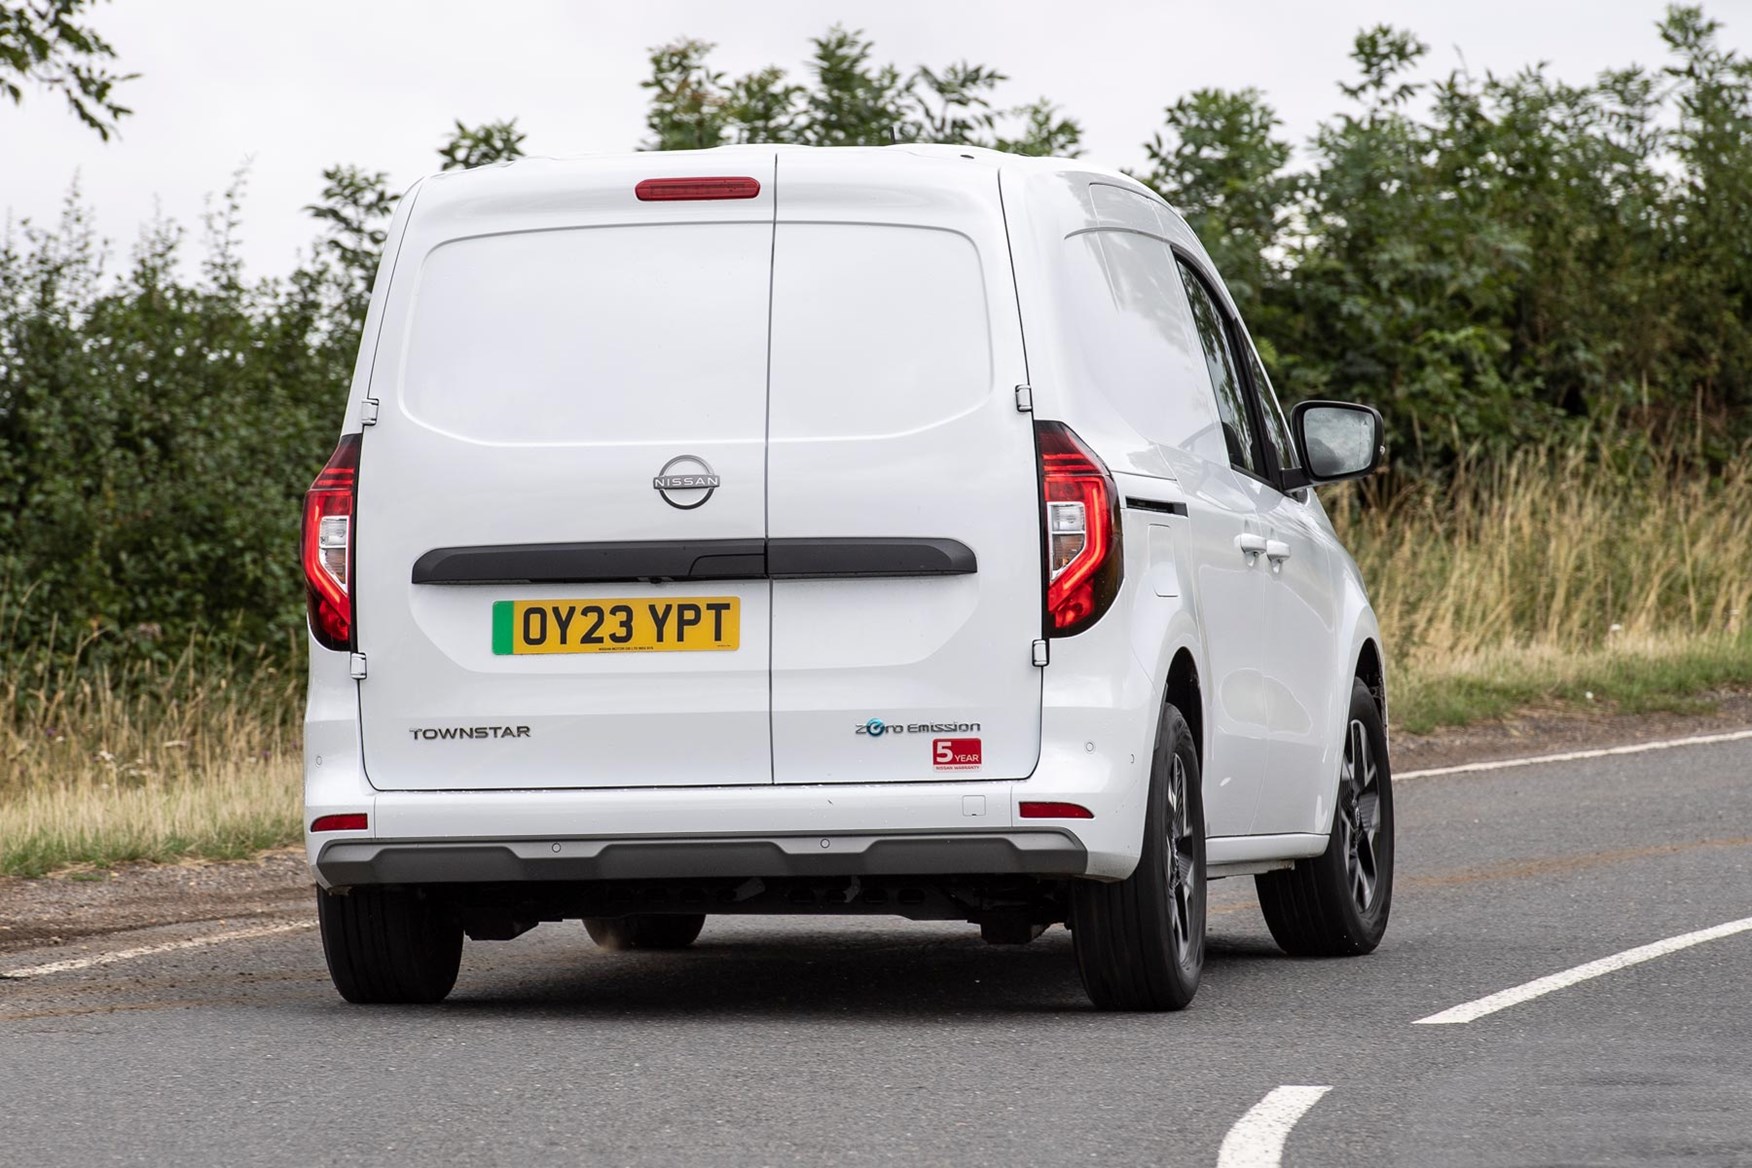 The Nissan Townstar is happier around town but comfortable at speed too.